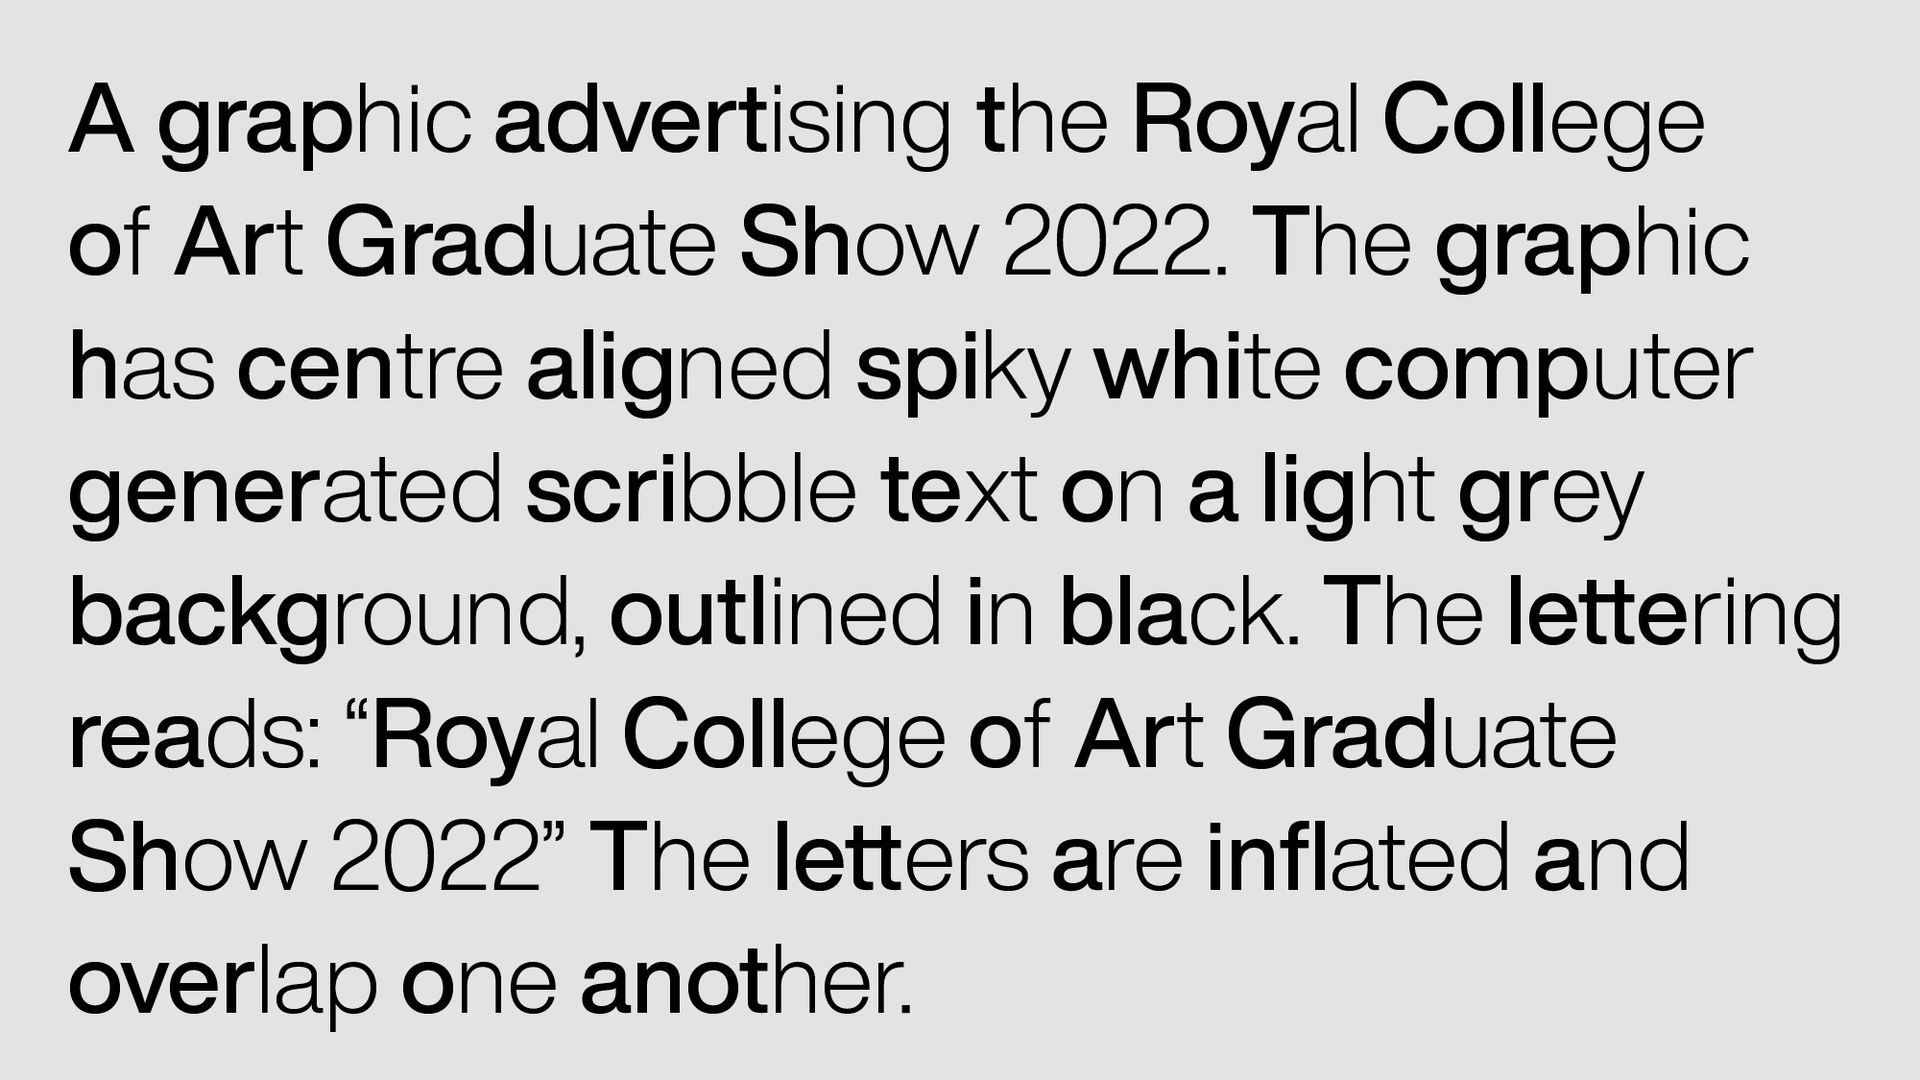 Black text on a light grey background reads: ‘A graphic advertising the Royal College of Art Graduate Show 2022. The graphic has centre aligned spiky white computer generated scribble text on a light grey background, outlined in black. The lettering reads: “Royal College of Art Graduate Show 2022” The letters are inflated and overlap one another.’